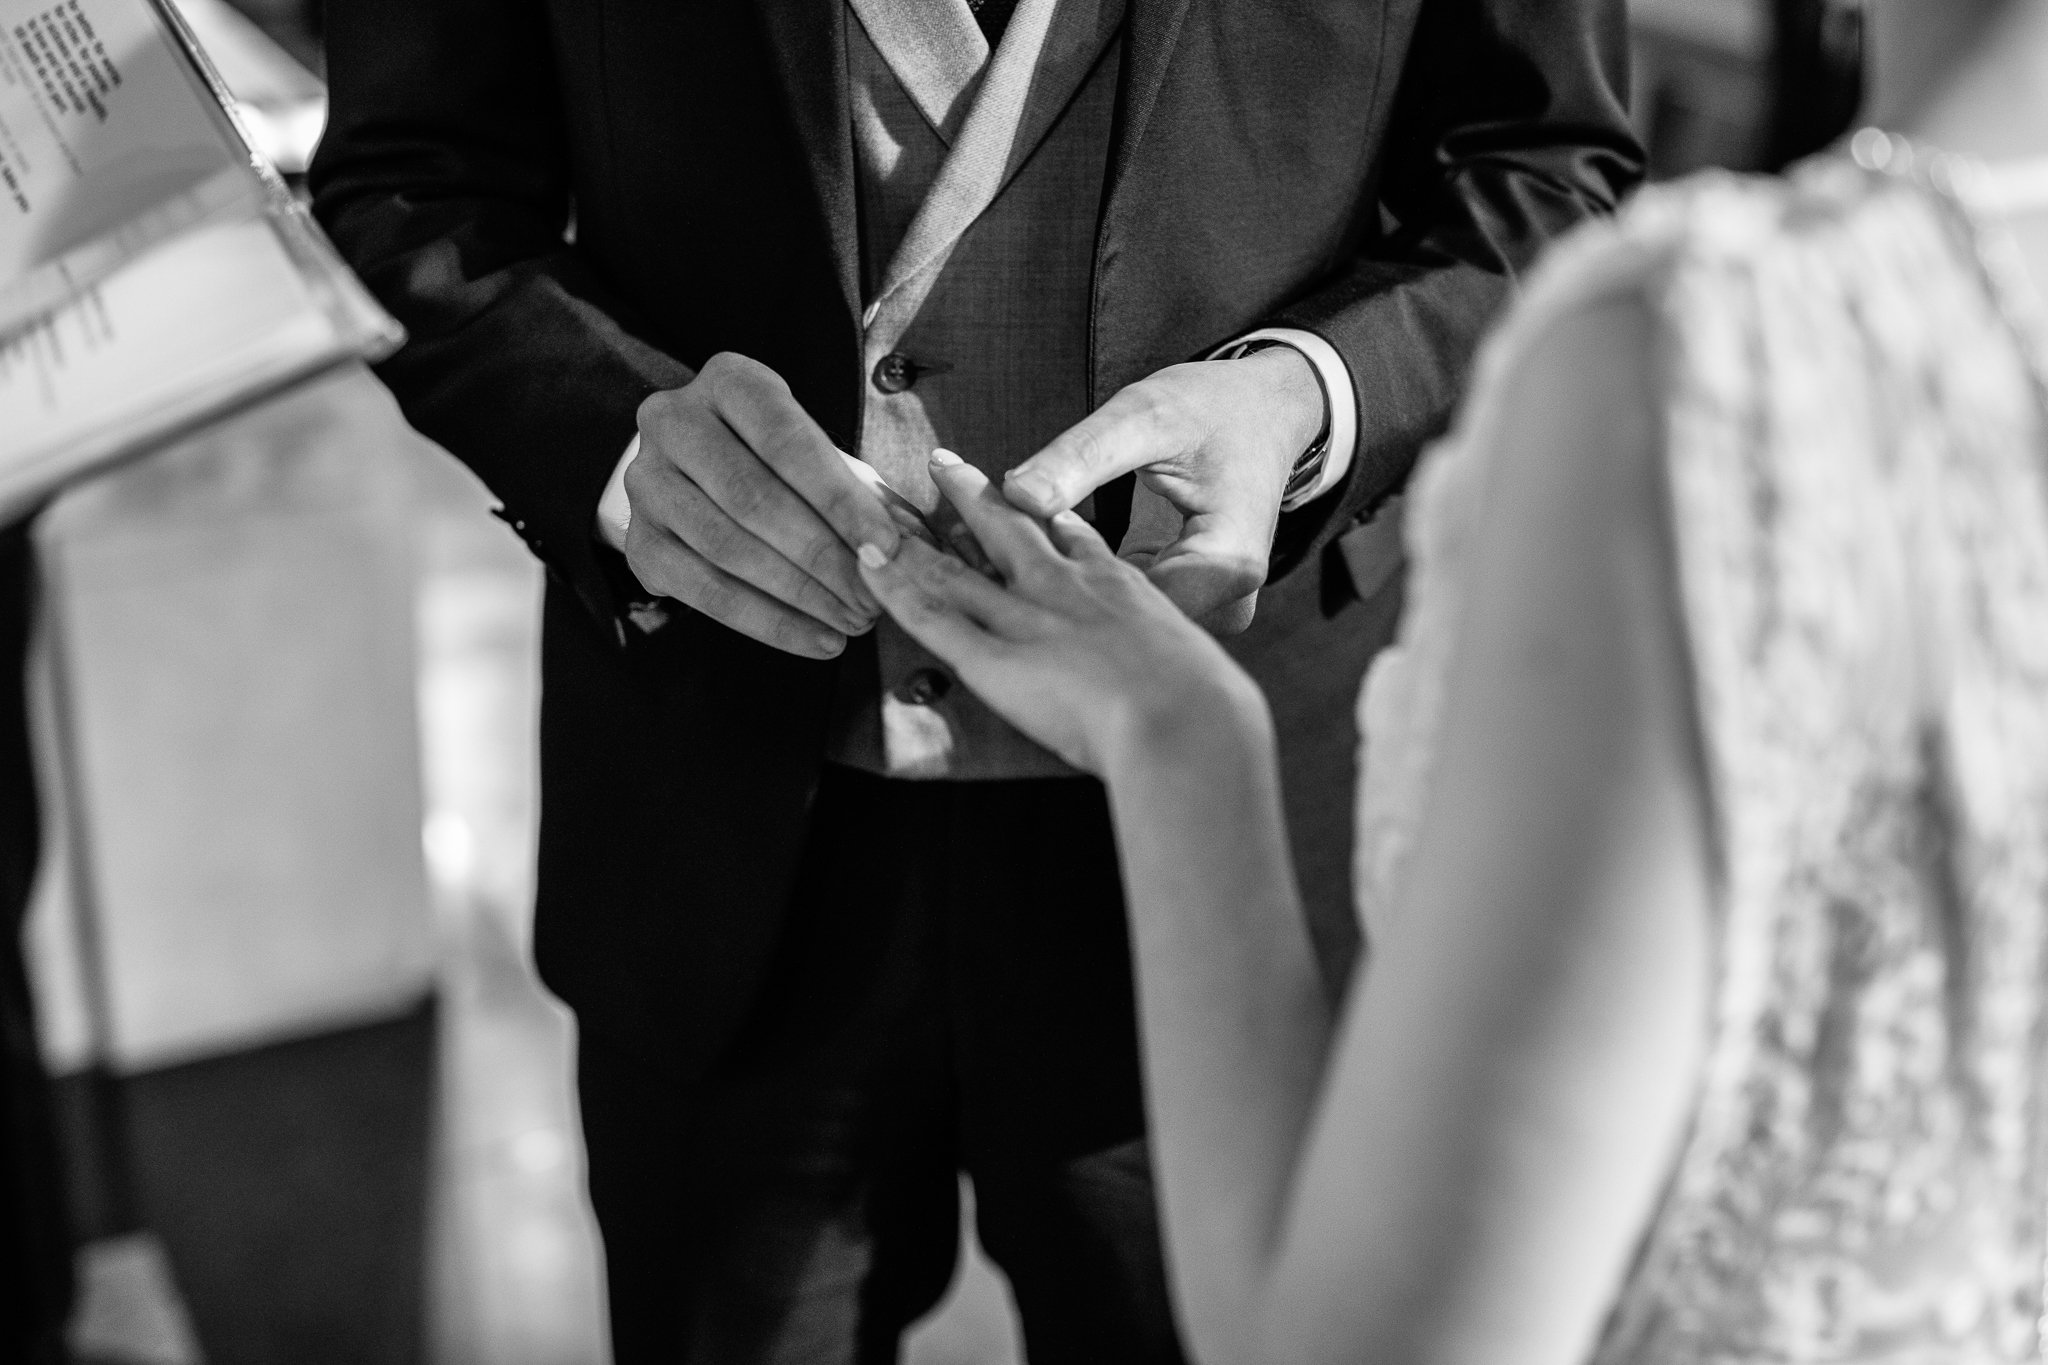  The Groom placing the ring on the Bride’s finger 